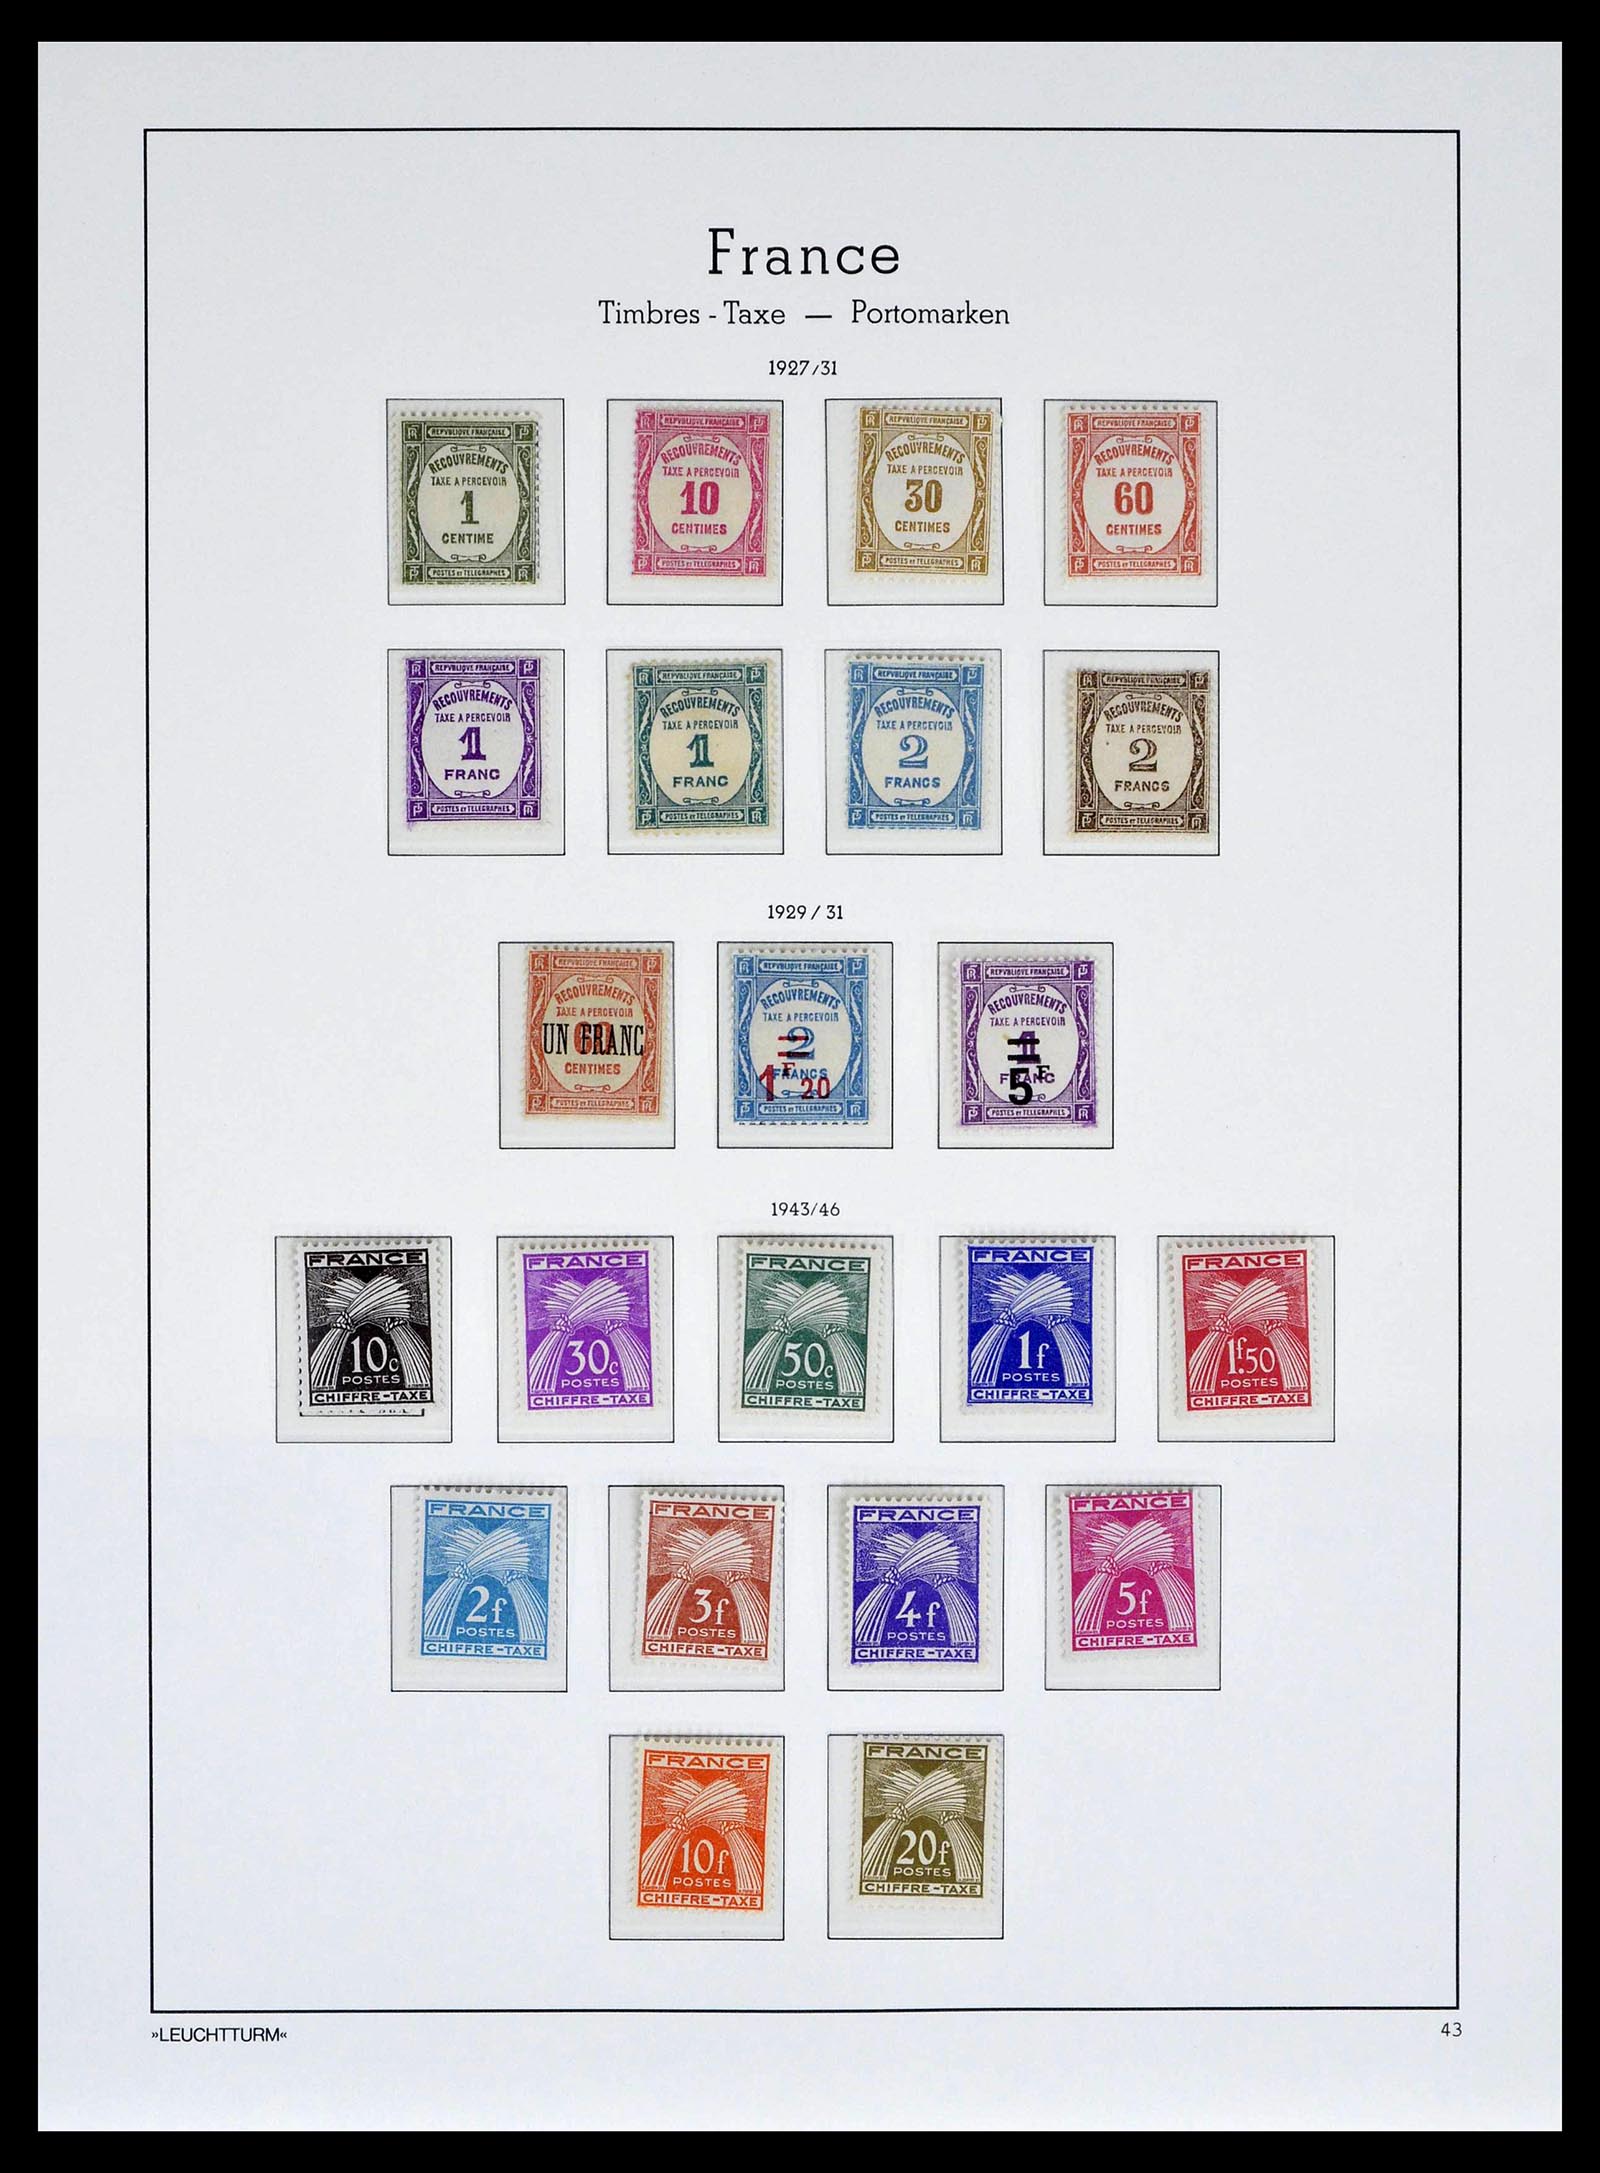 39408 0004 - Stamp collection 39408 France postage dues 1859-1946.